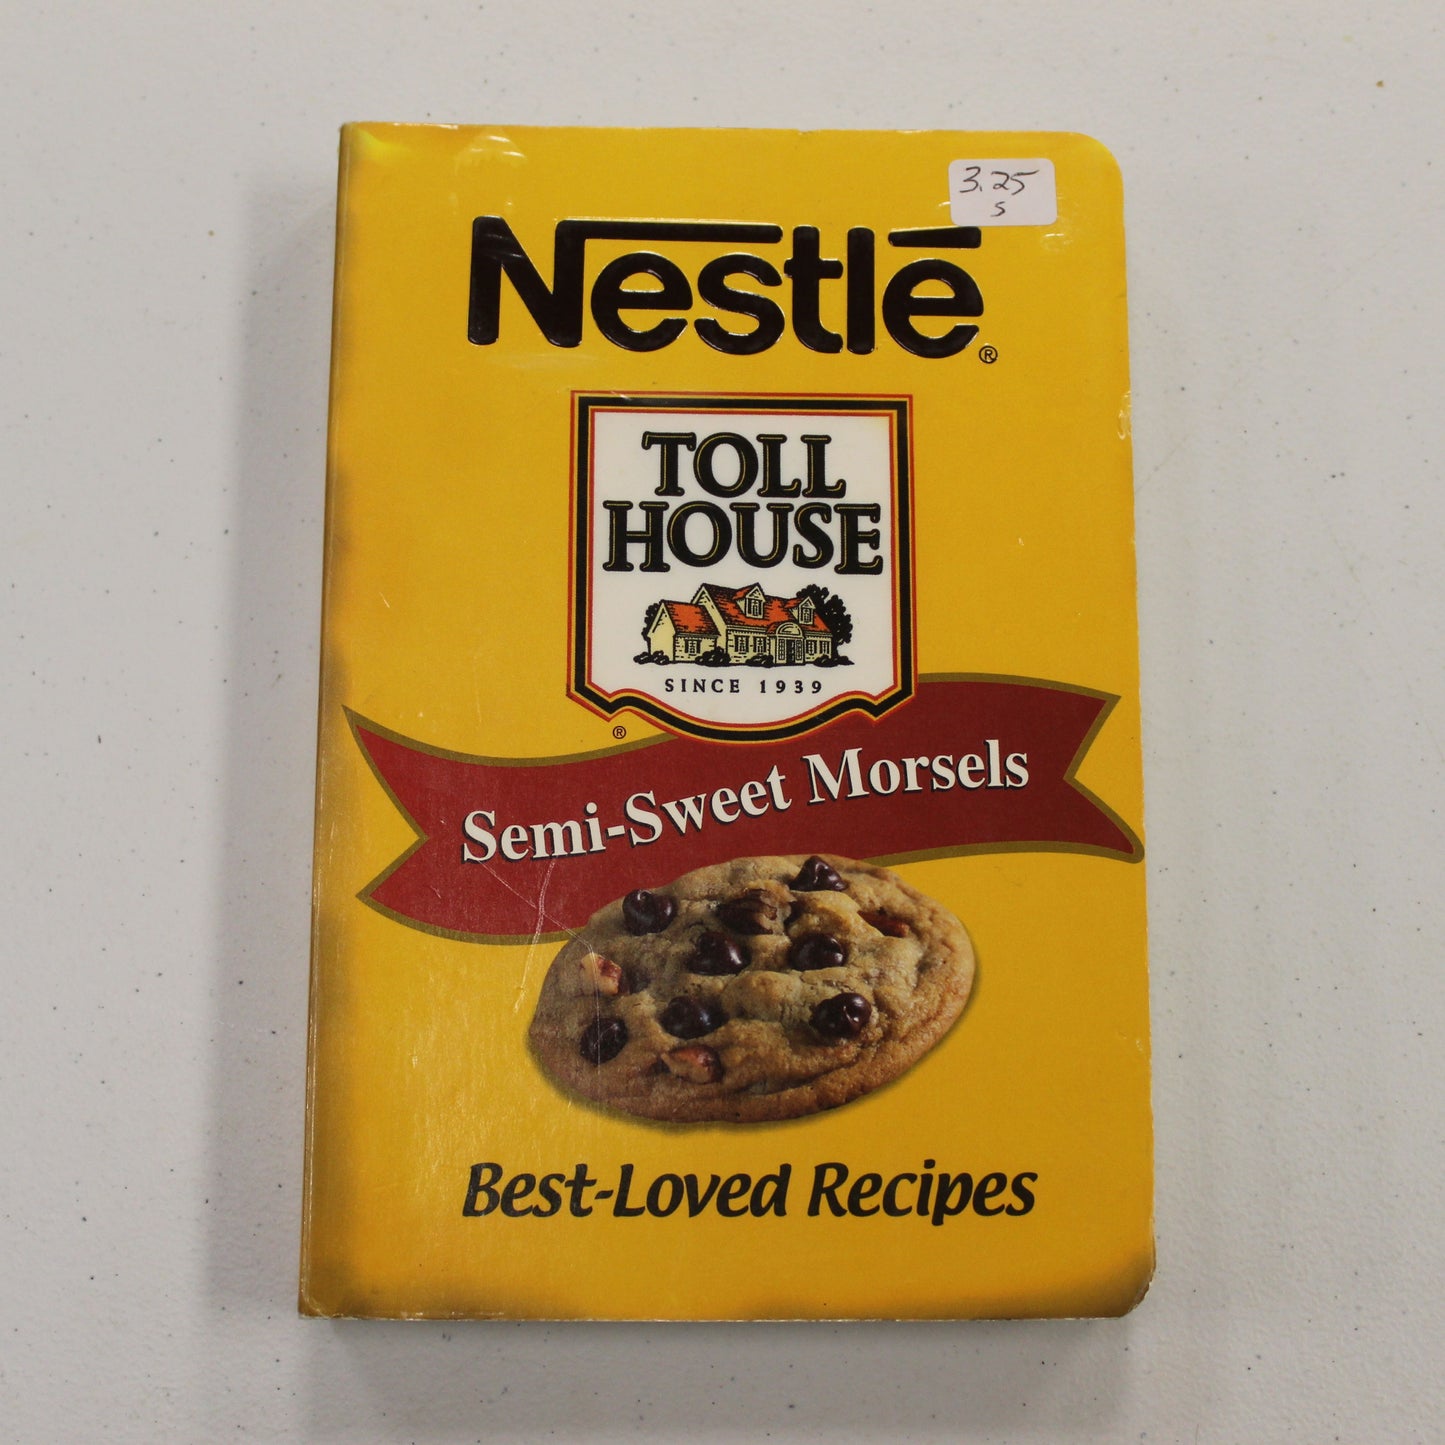 NESTLE TOLL HOUSE BEST LOVED RECIPES